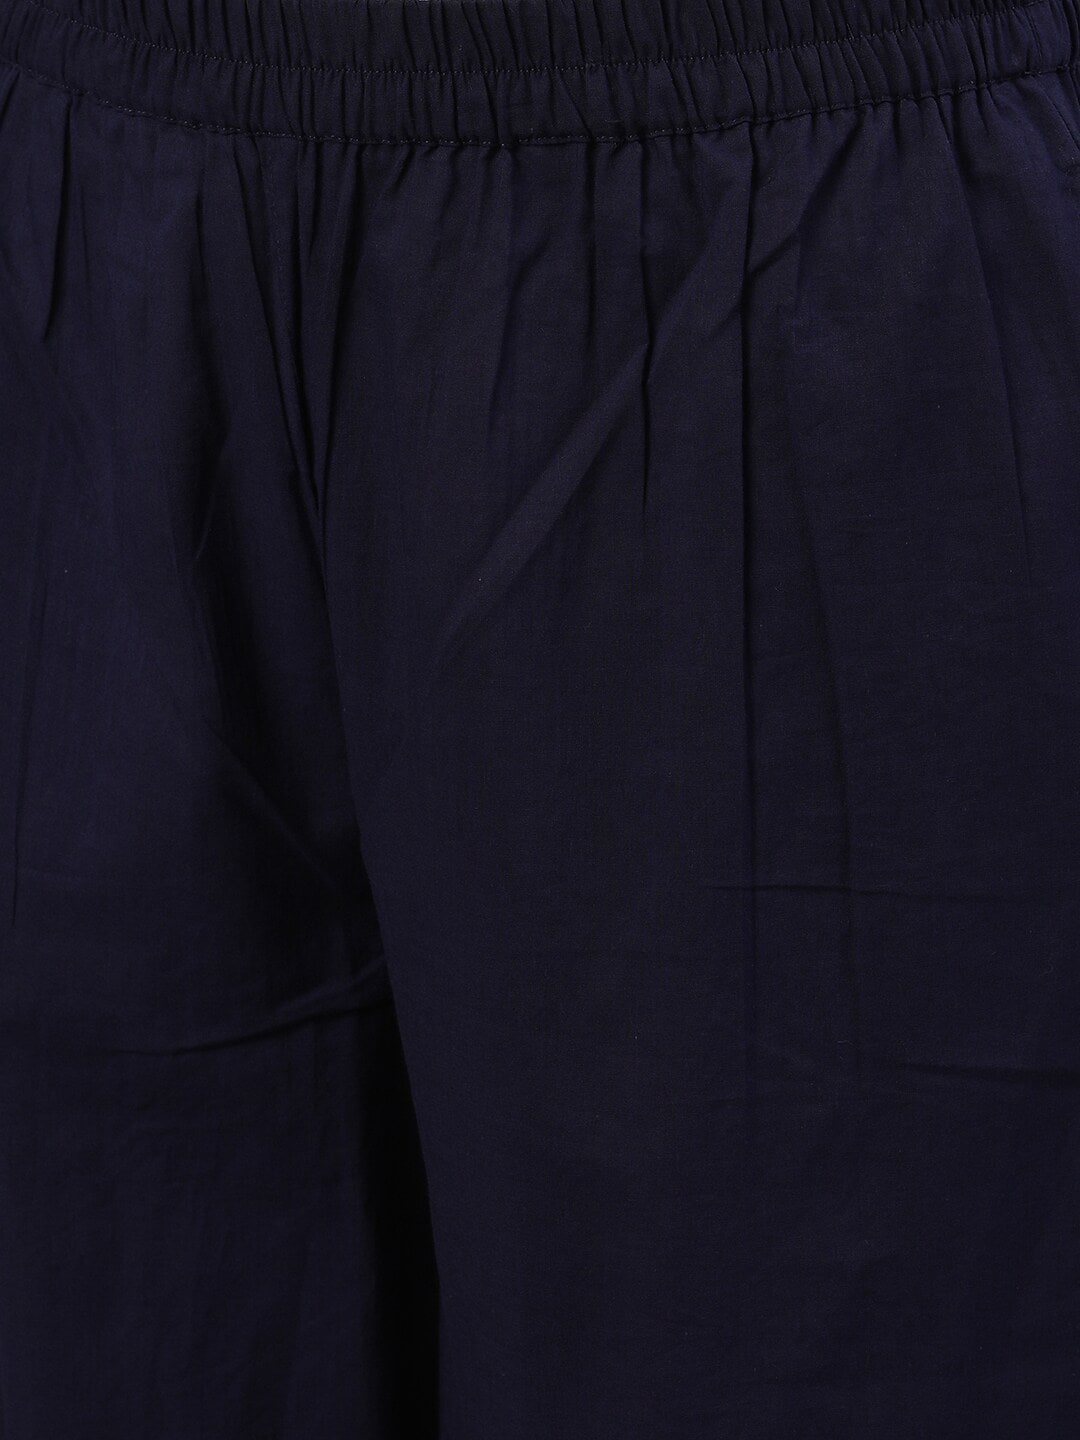 Women Navy Blue Trouser with lace detailing